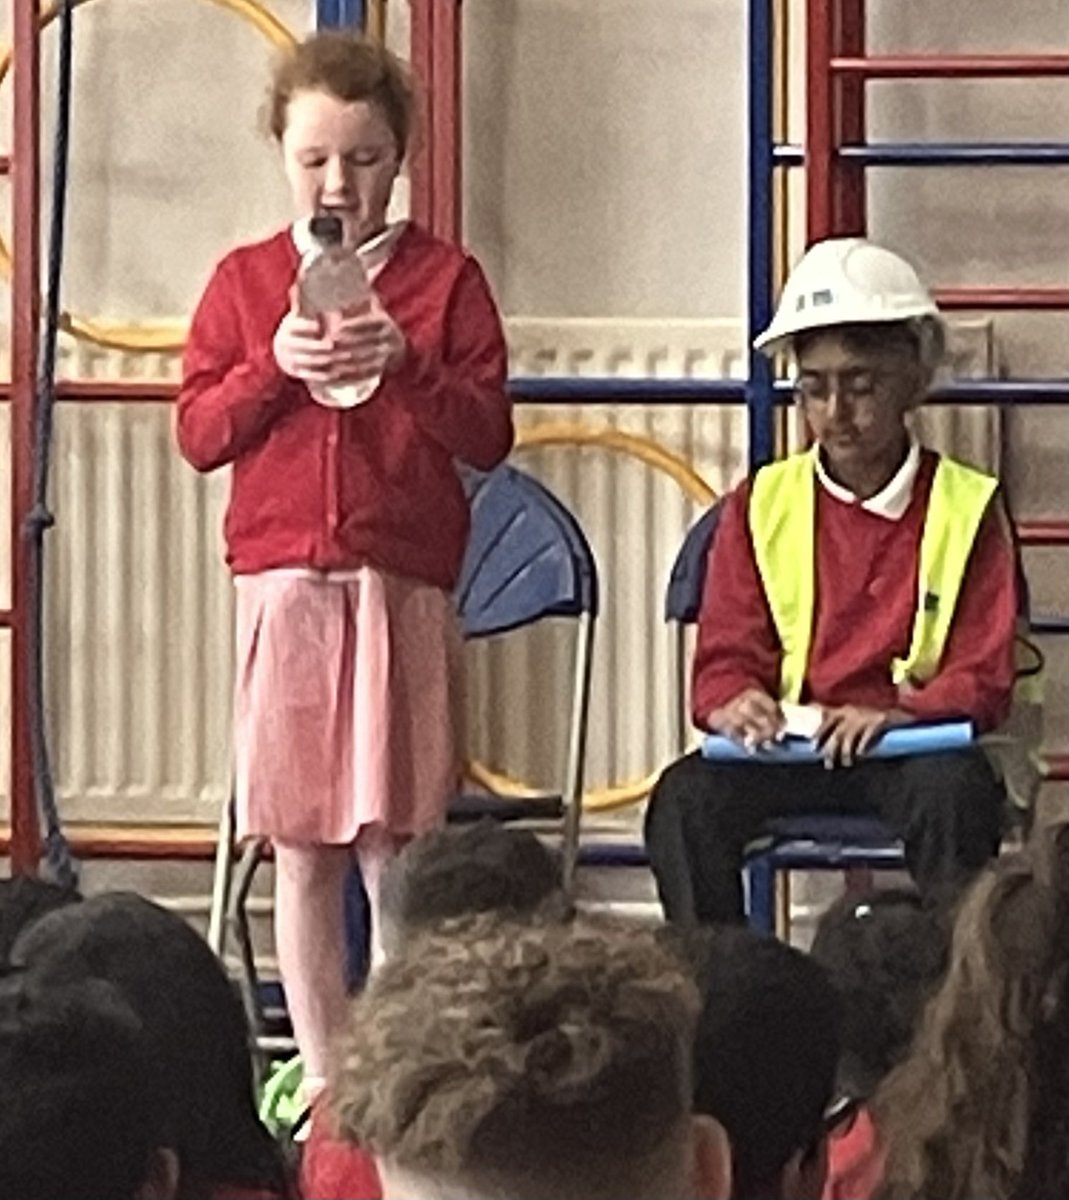 We had a great visit from Severn Trent Water this week, they did an assembly about saving water and what they do as well as working with both Year 3 and 5 @greenheartlp @stwater